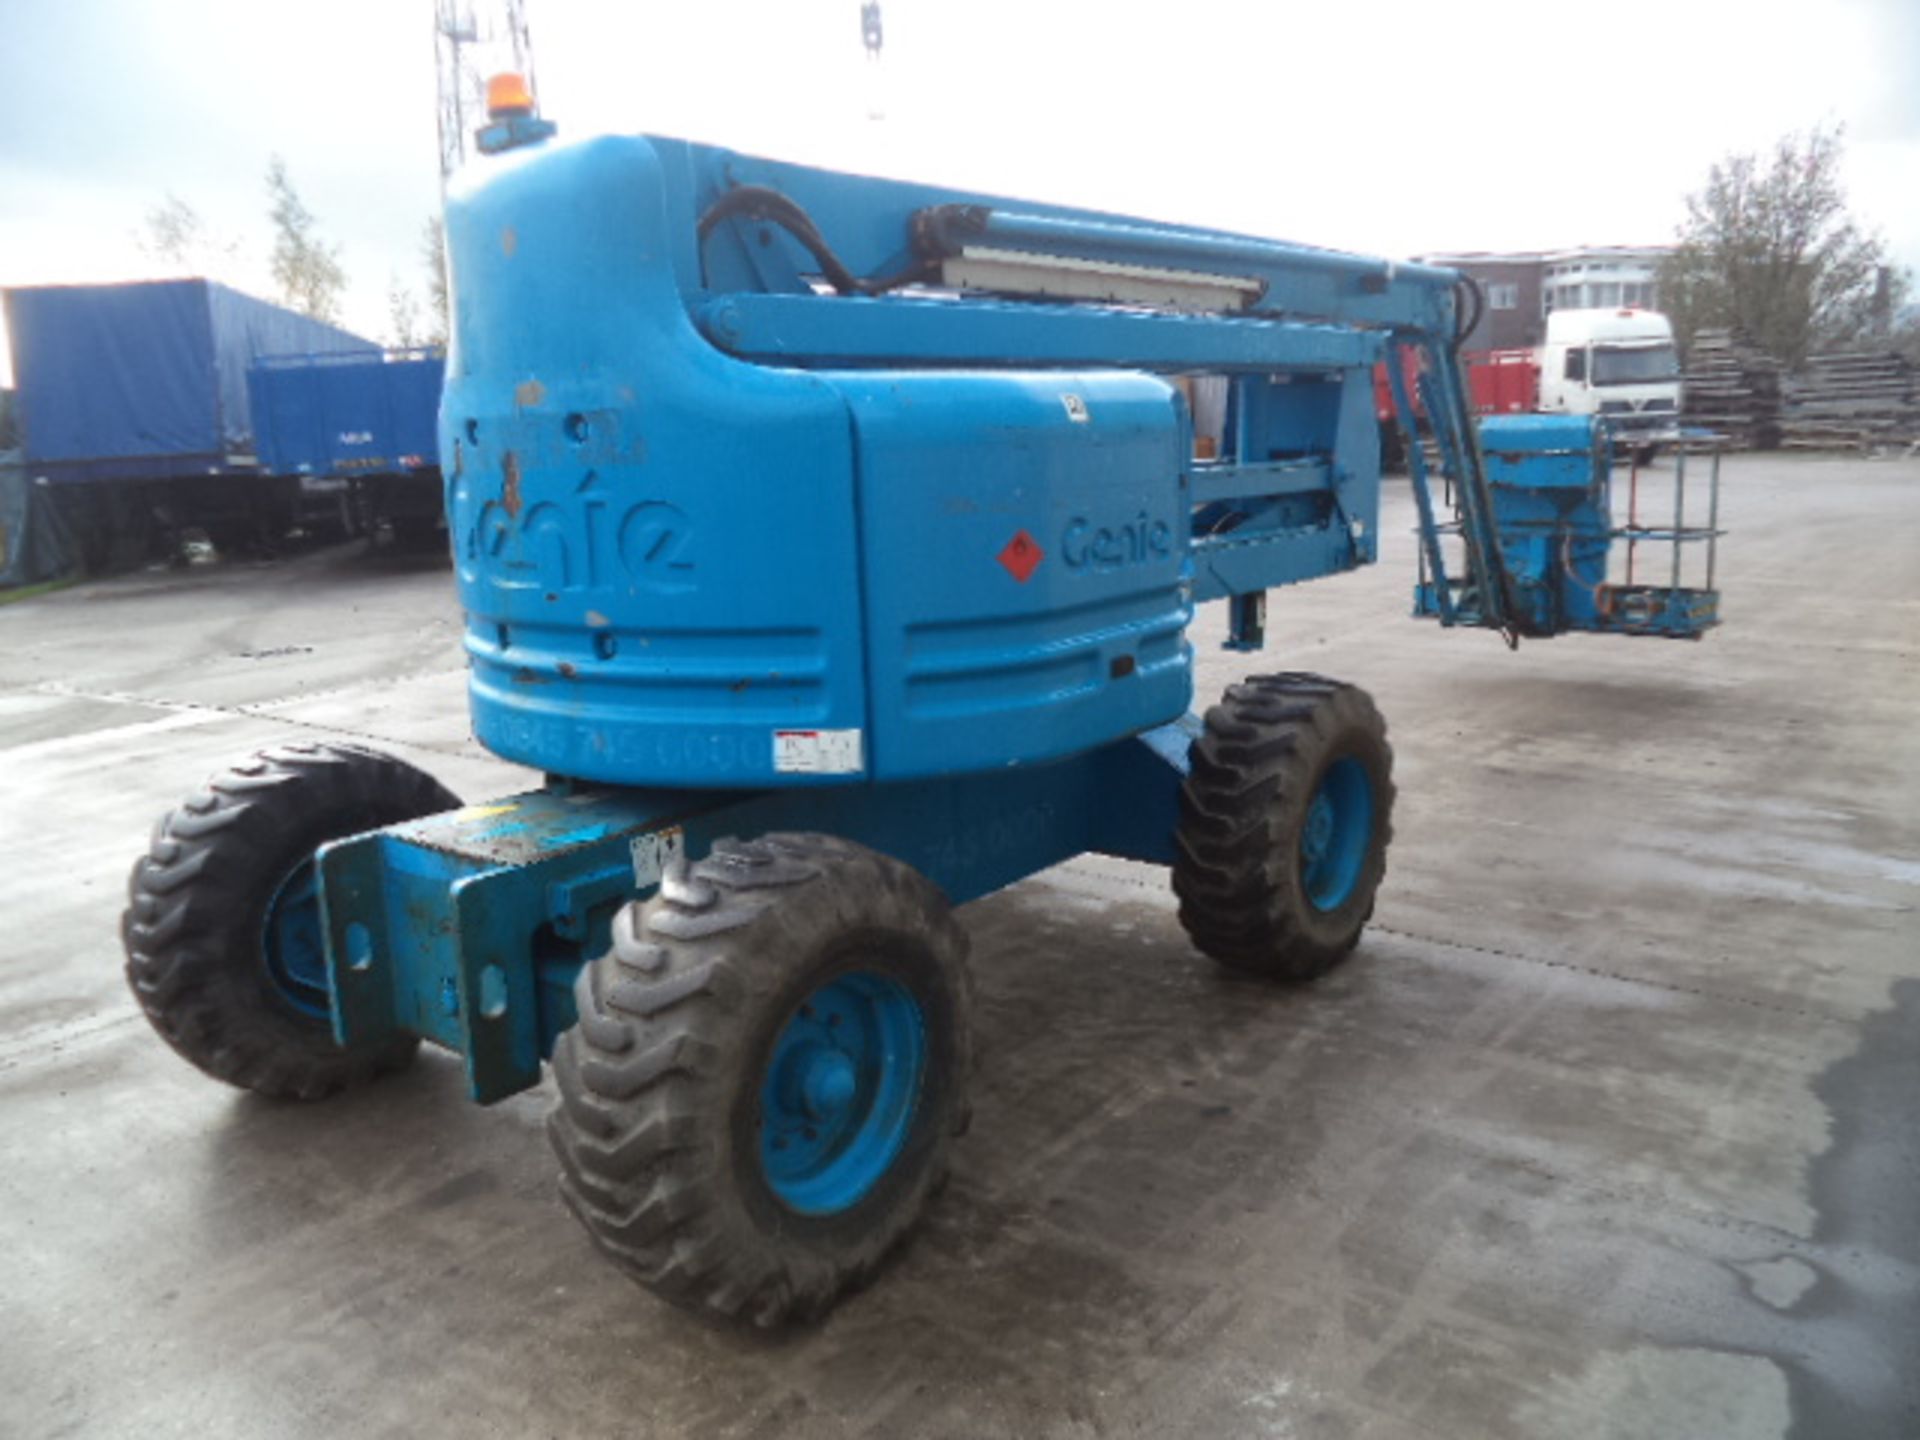 1999 GENIE Z60/34 2wd articulated boom lift S/n: 1986 (Runs, Drives, Lifts) - Image 3 of 7